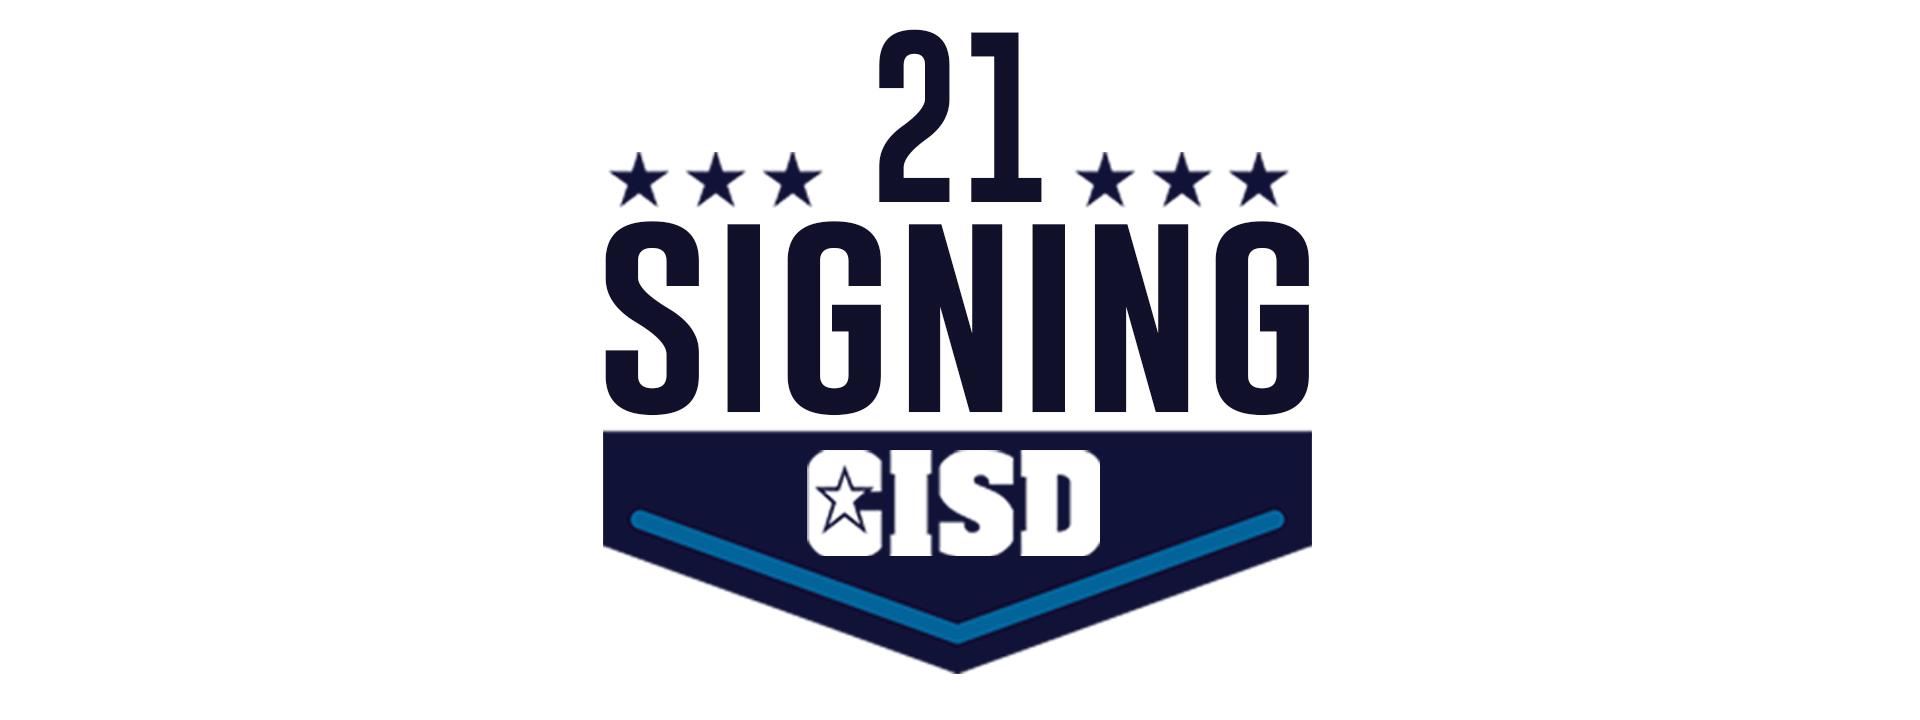 2019 Signing Day Crowley ISD 